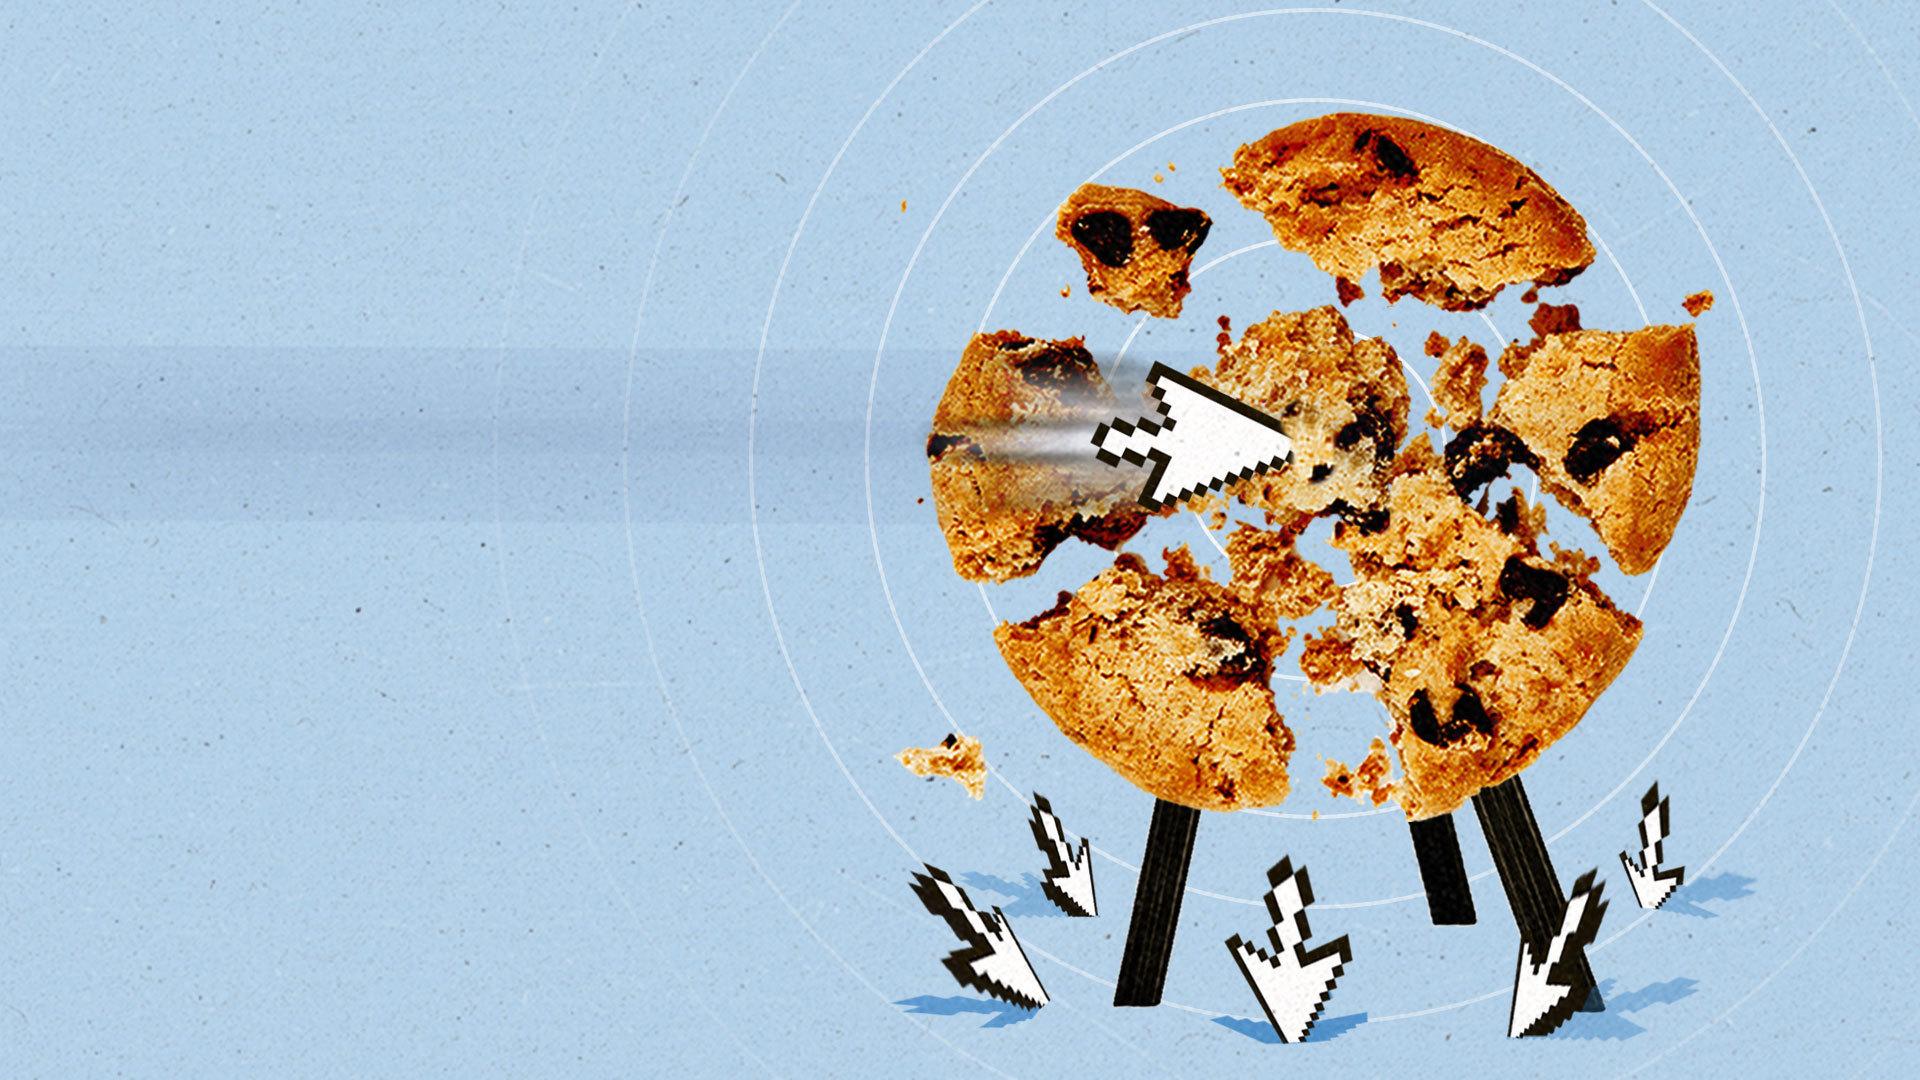 A chocolate chip cookie dartboard crumbles as darts in the form of cursors fall to the ground